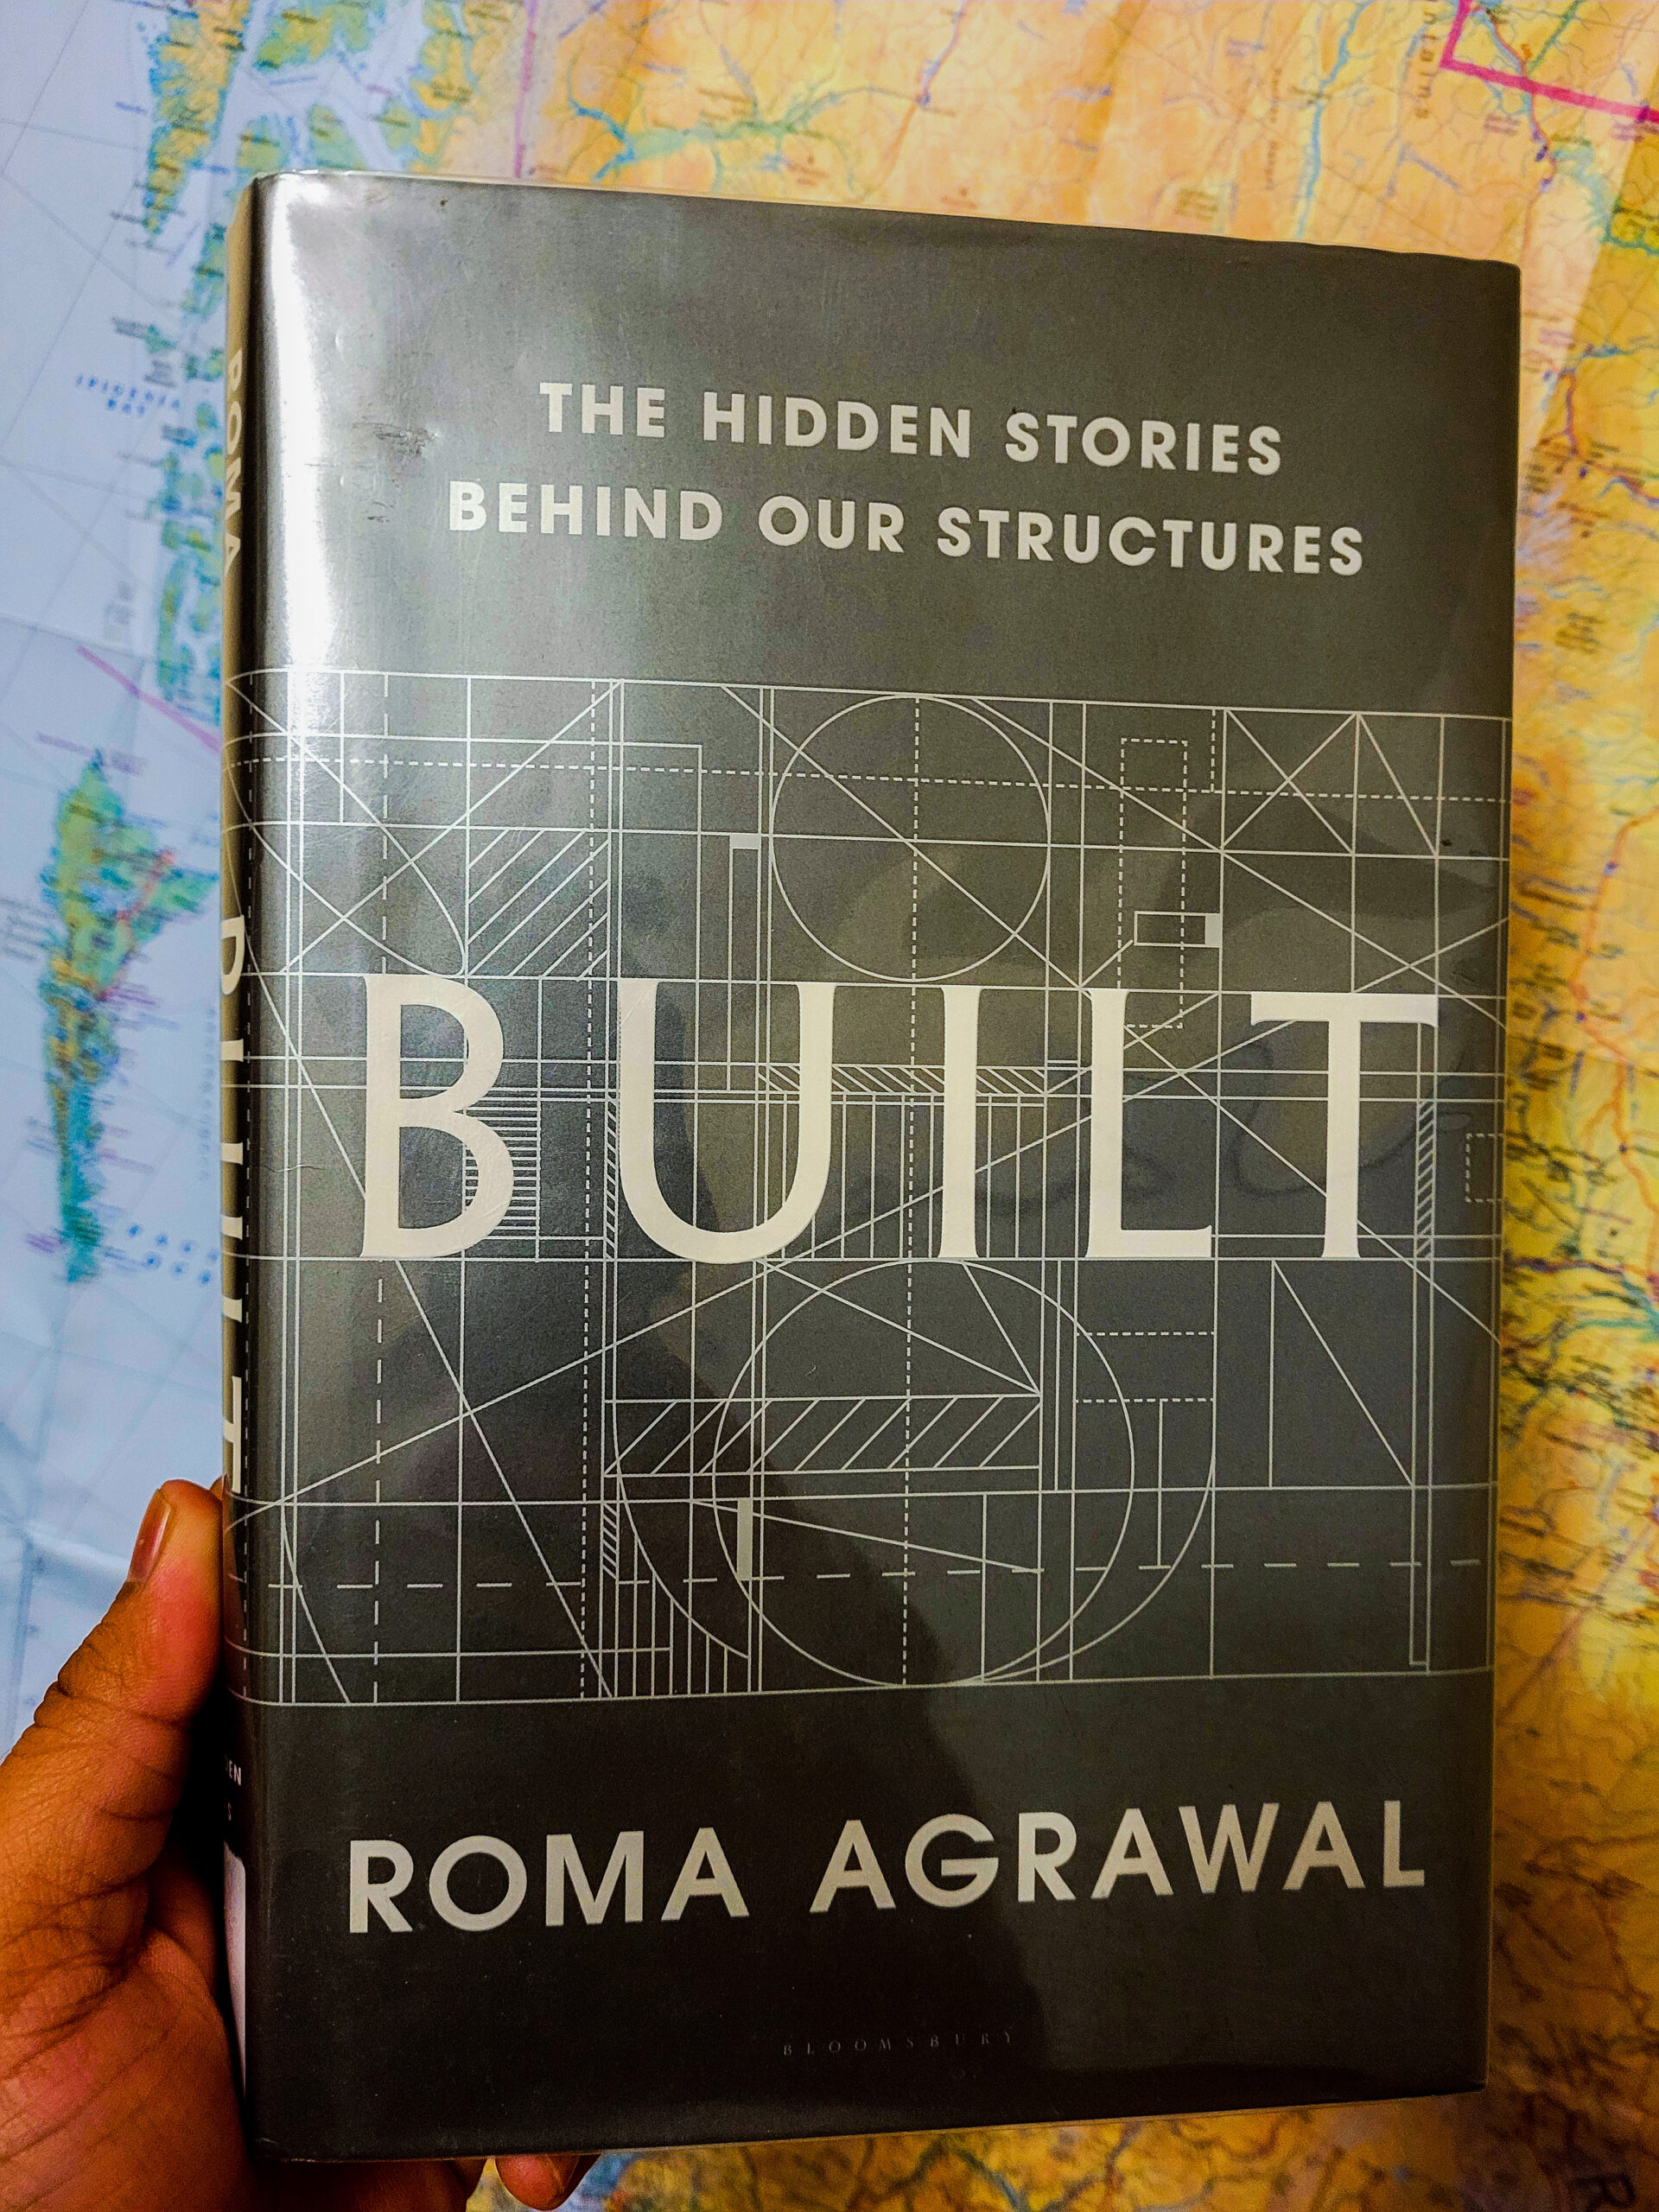 10 things I learned from the book | Built: The hidden stories behind our structures